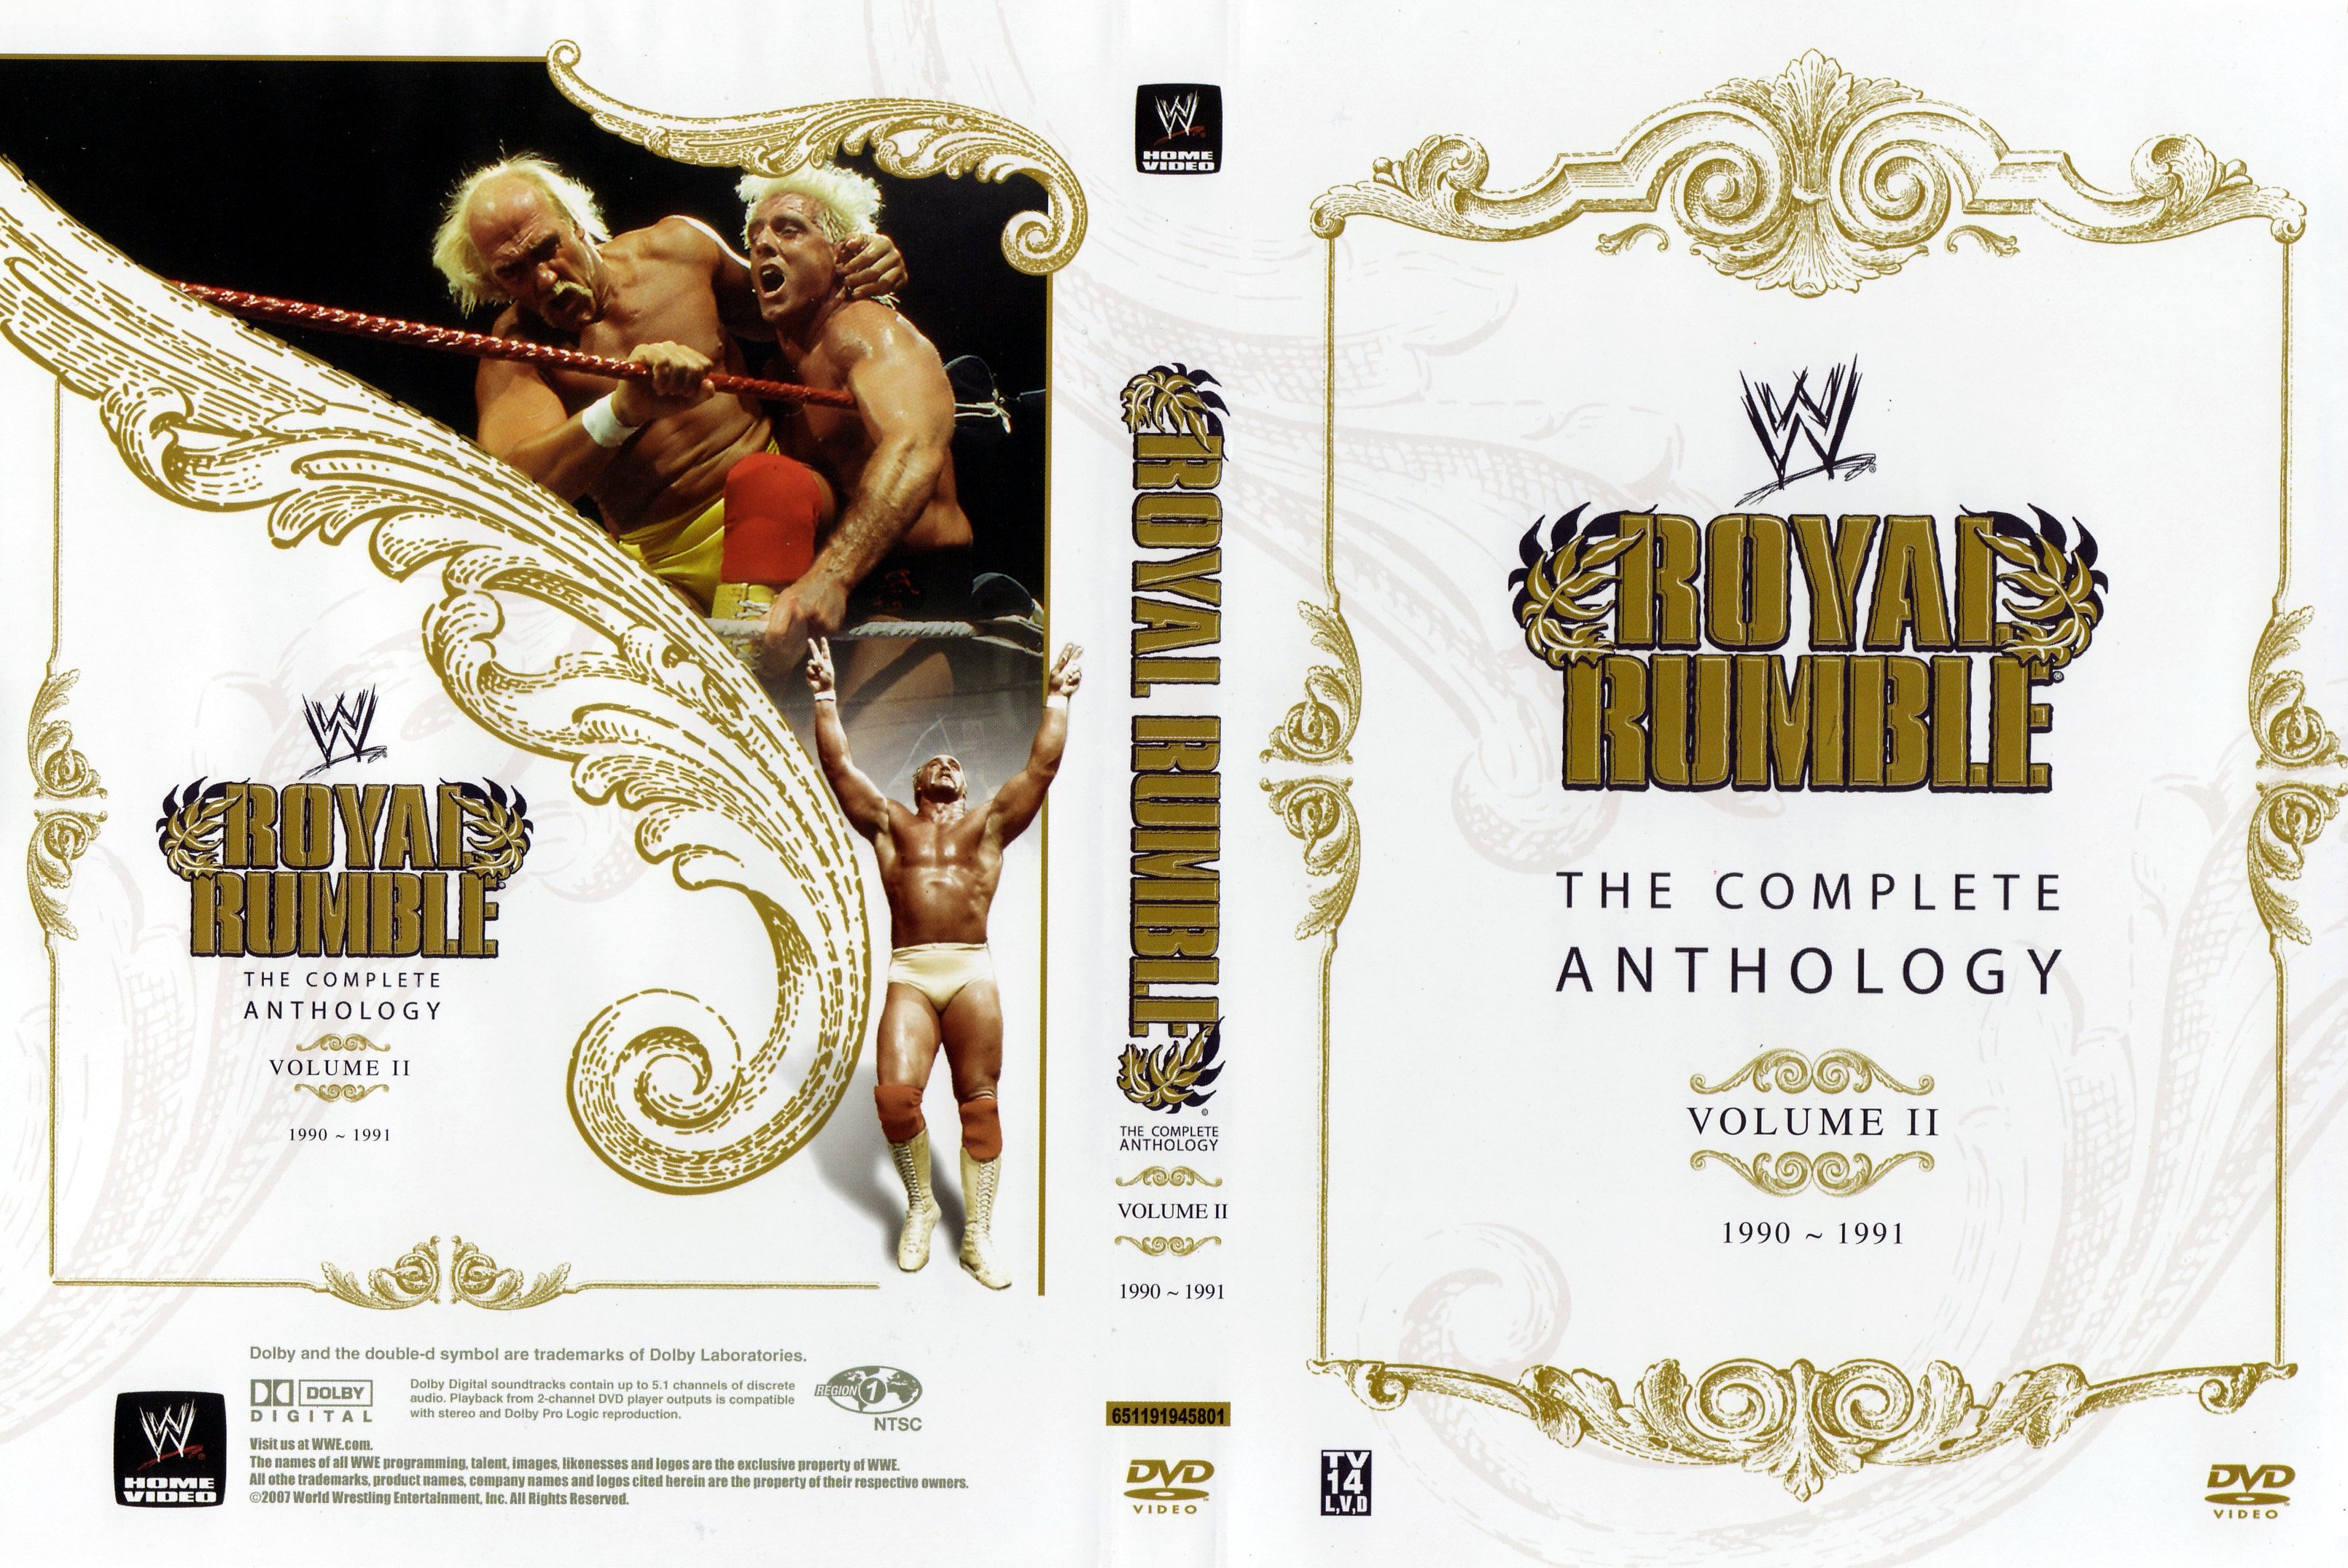 Jaquette DVD WWE Royal Rumble the complete antology vol 02